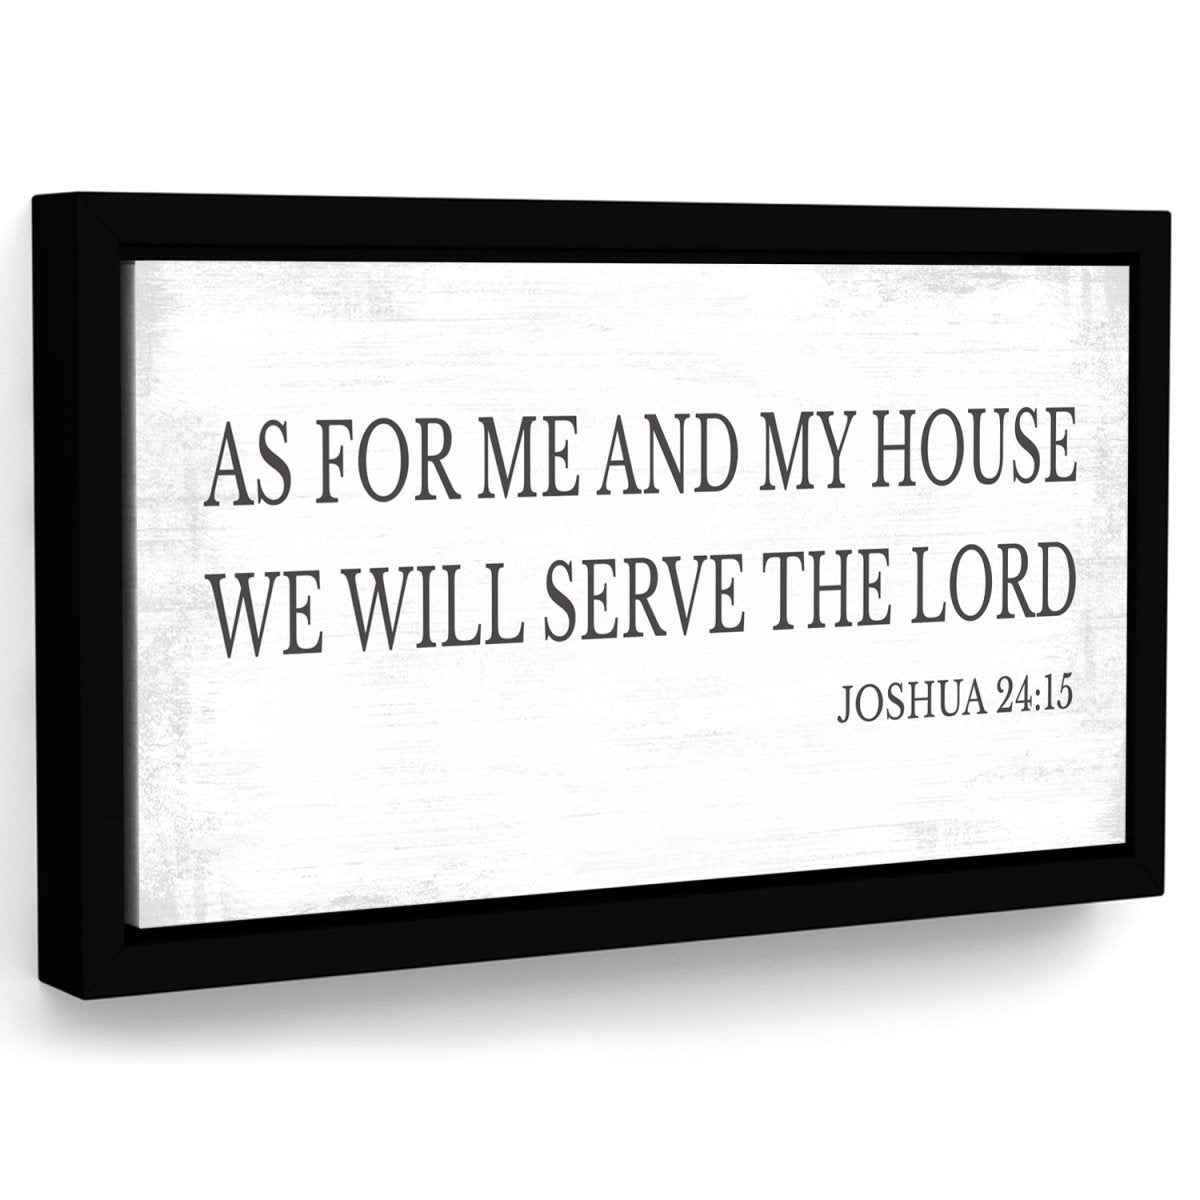 As For Me And My House We Will Serve The Lord Sign - Pretty Perfect Studio